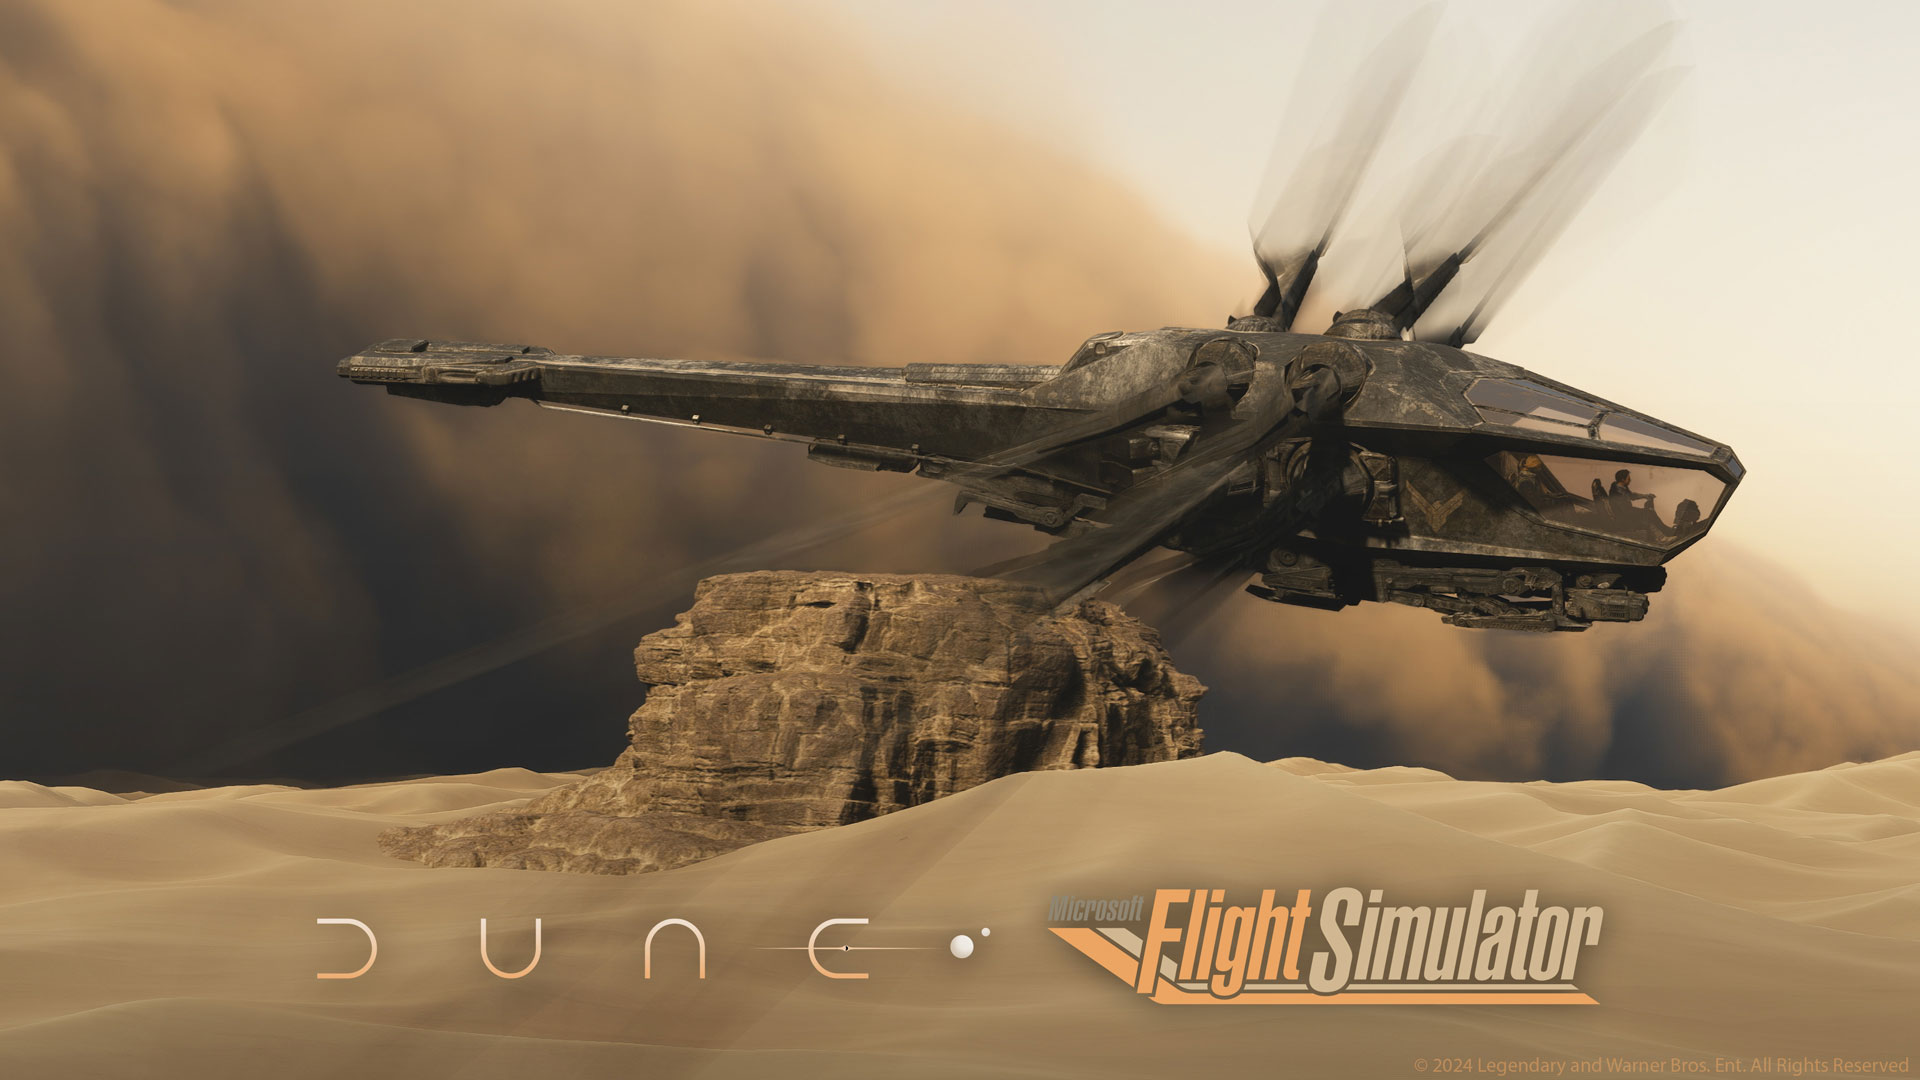 In collaboration with Legendary Pictures and Warner Bros. Entertainment, Xbox and Microsoft Flight Simulator are taking you beyond Planet Earth into the harsh deserts of the world of “Dune” and the planet Arrakis.